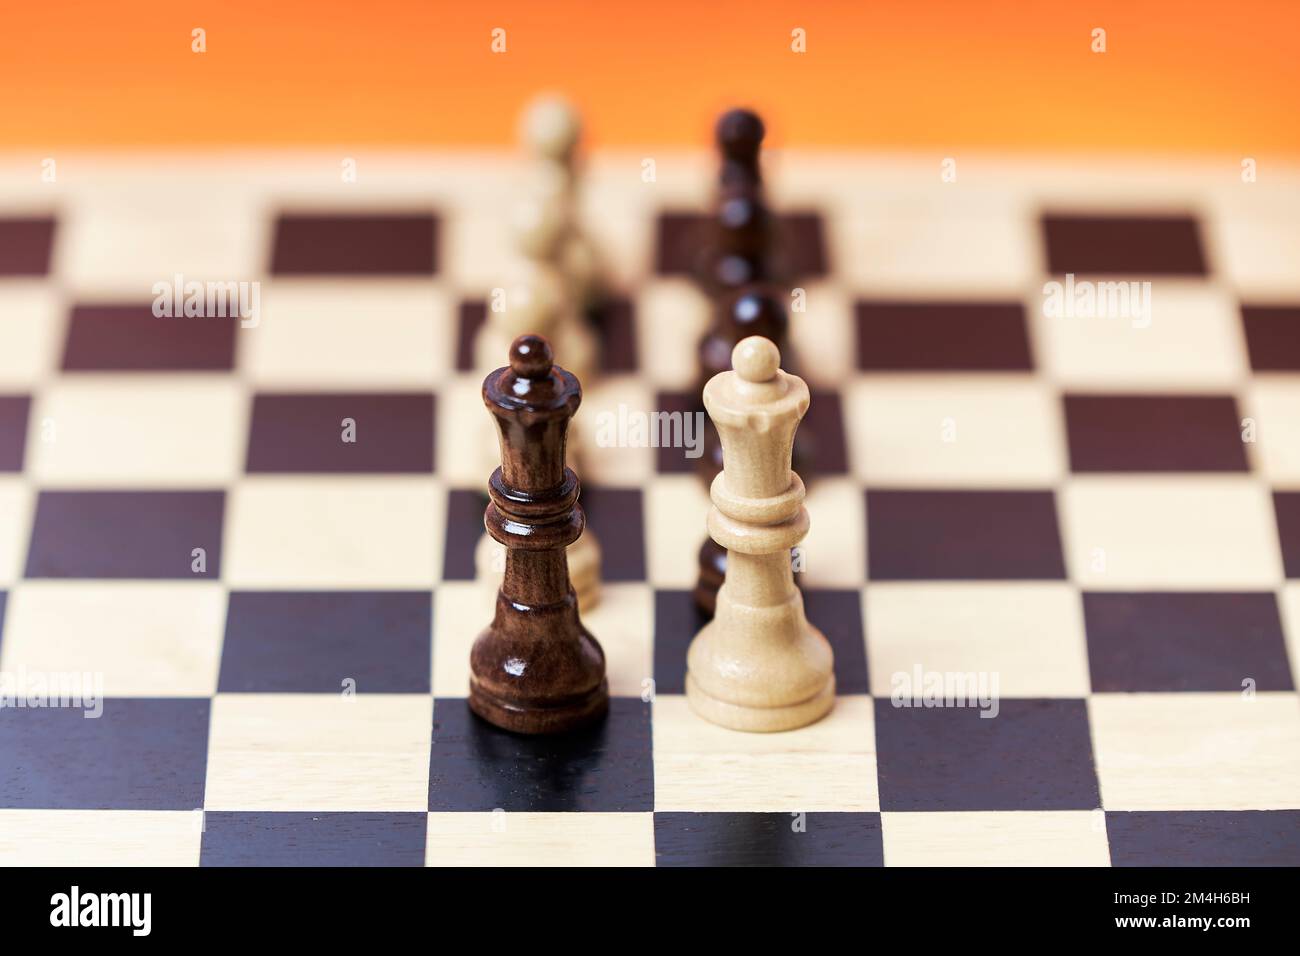 Chess pieces on a chessboard on an orange background. Business strategy chess move Stock Photo